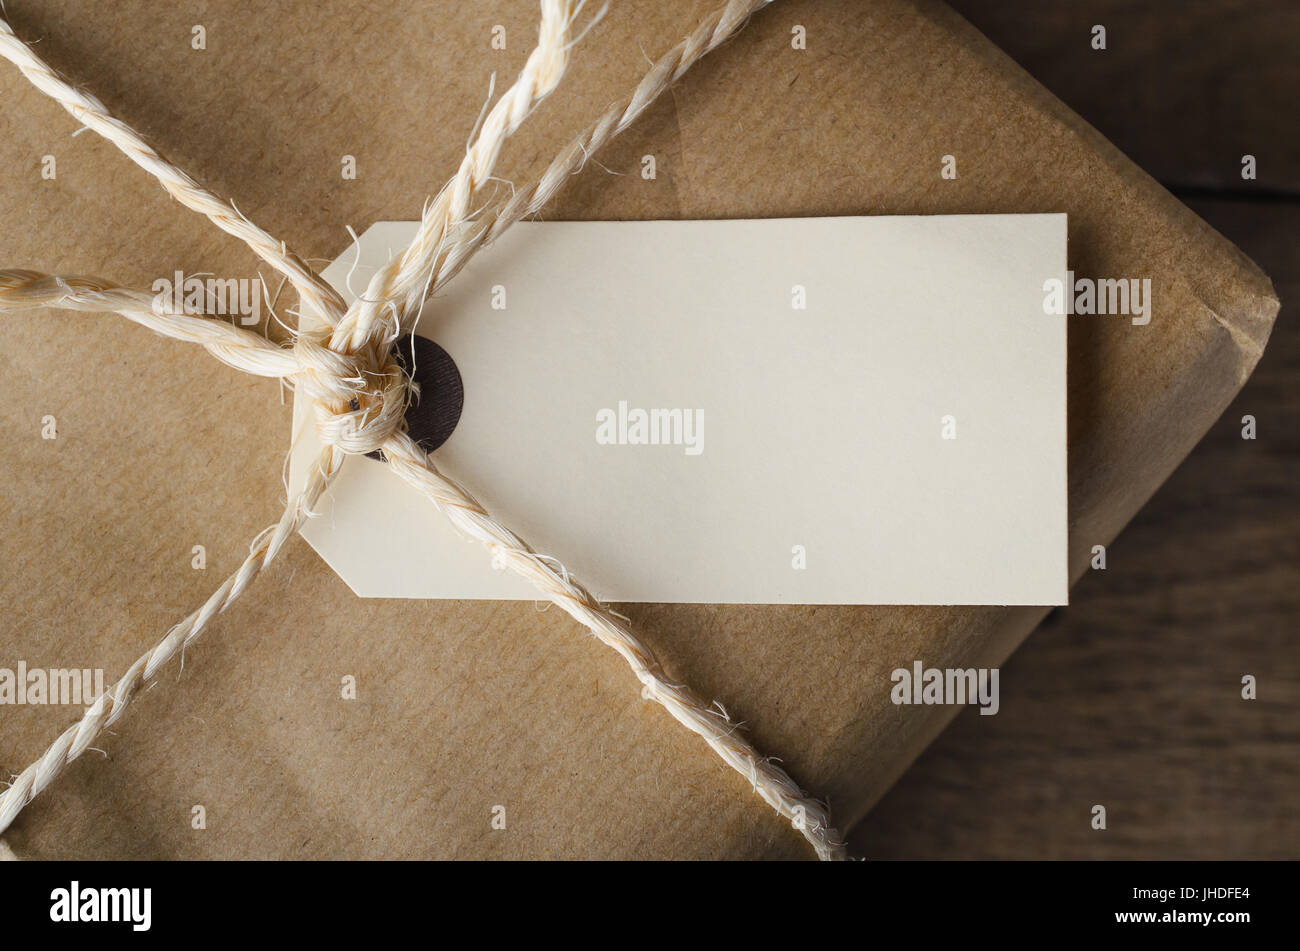 Overhead close up of a blank parcel label, tied with string to a package wrapped in plain brown paper. Stock Photo